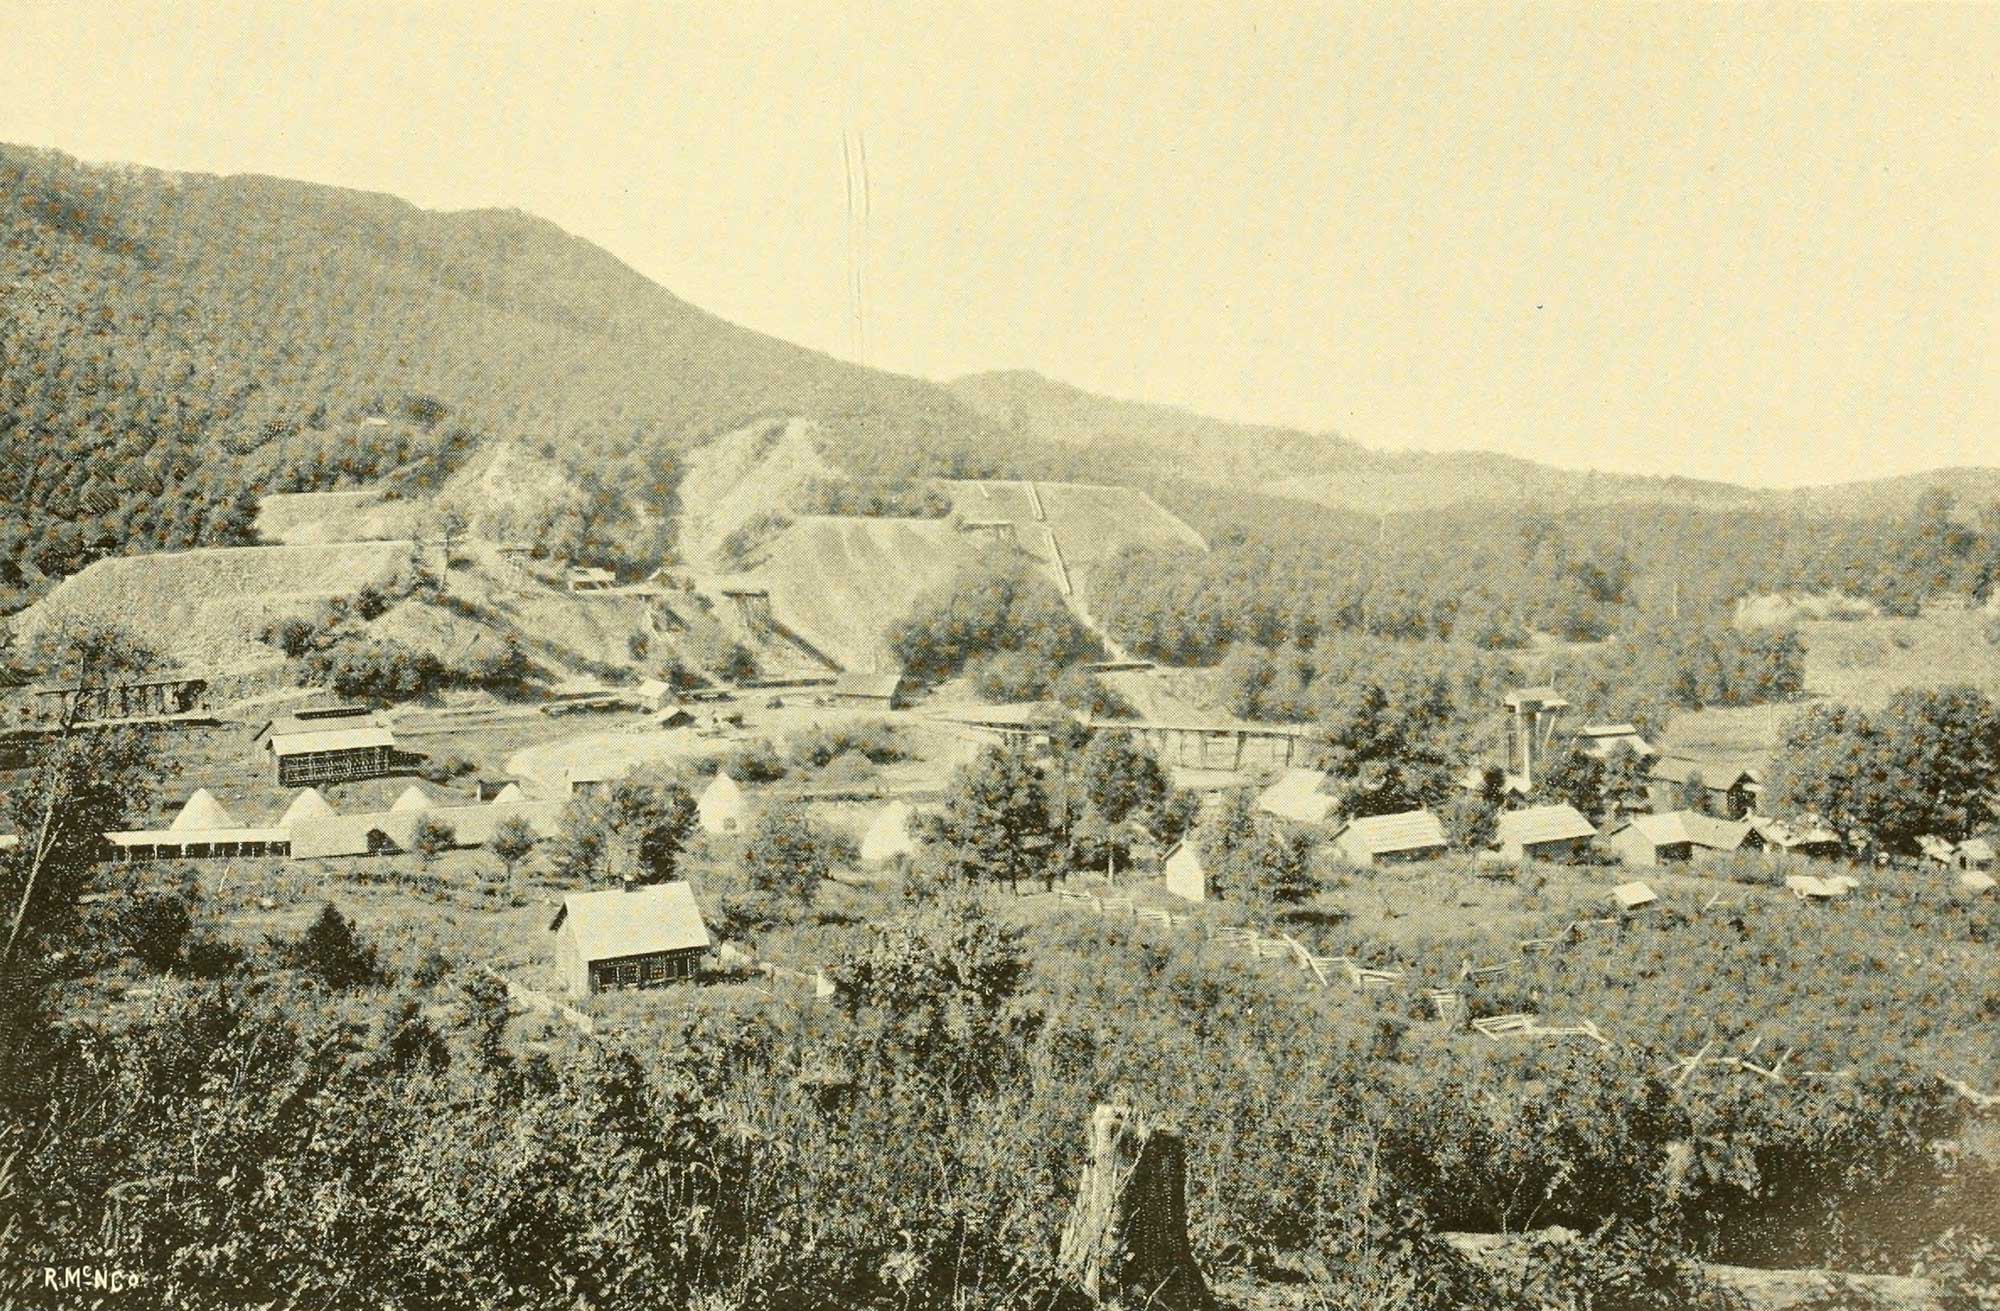 Black and white photo of the Cranberry Iron Mine, North Carolina, showing buildings on the landscape.